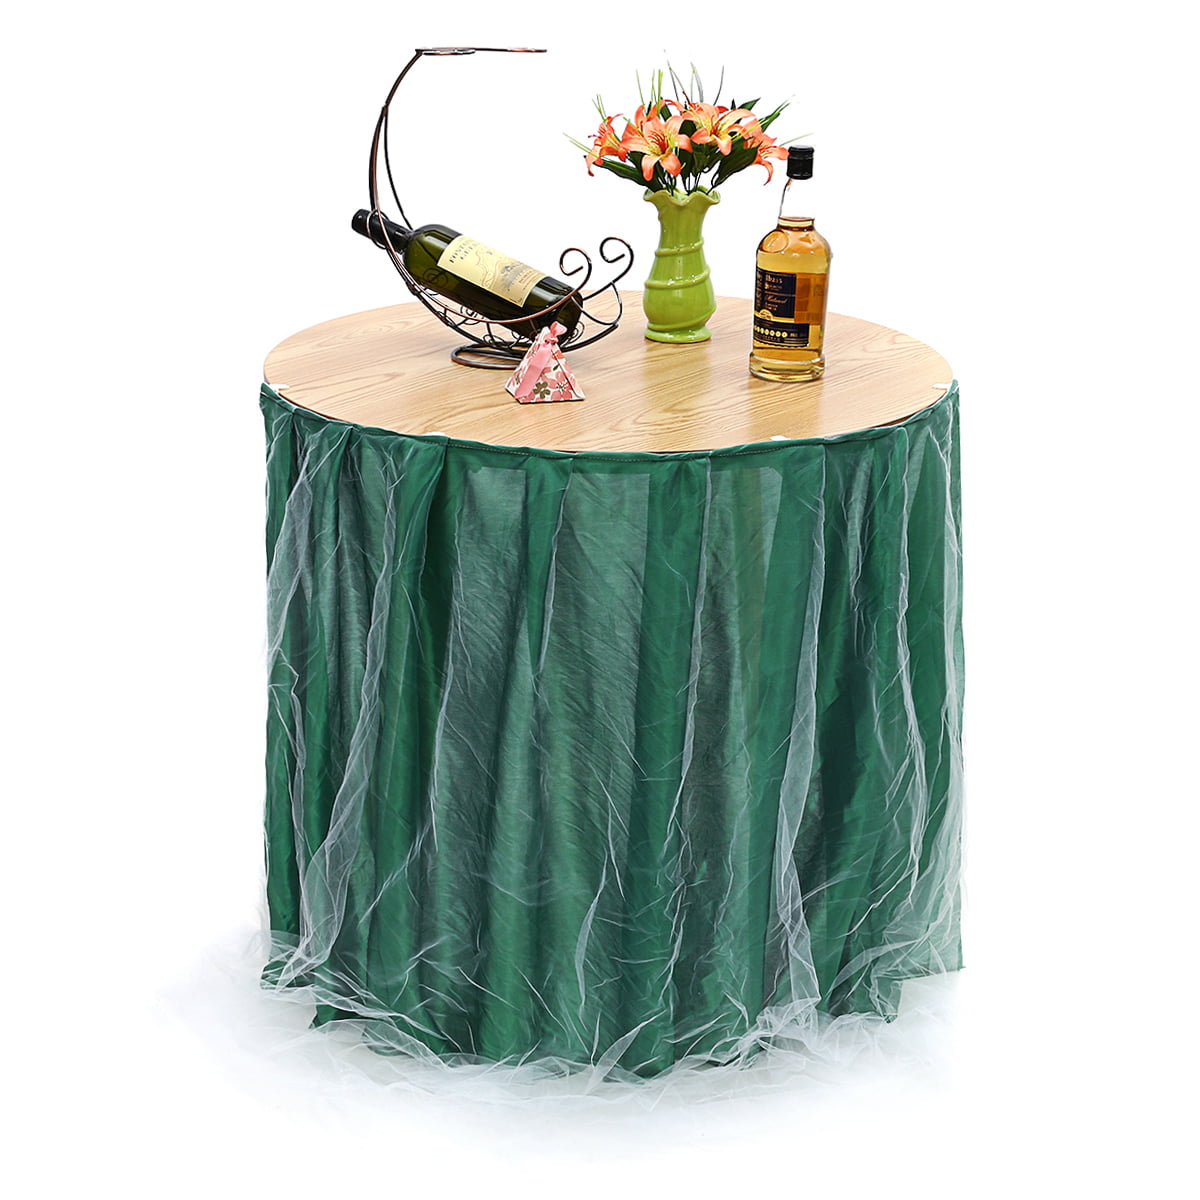 40inch X 30inch Tulle Table Skirt For, 30 Inch Round Table Cover